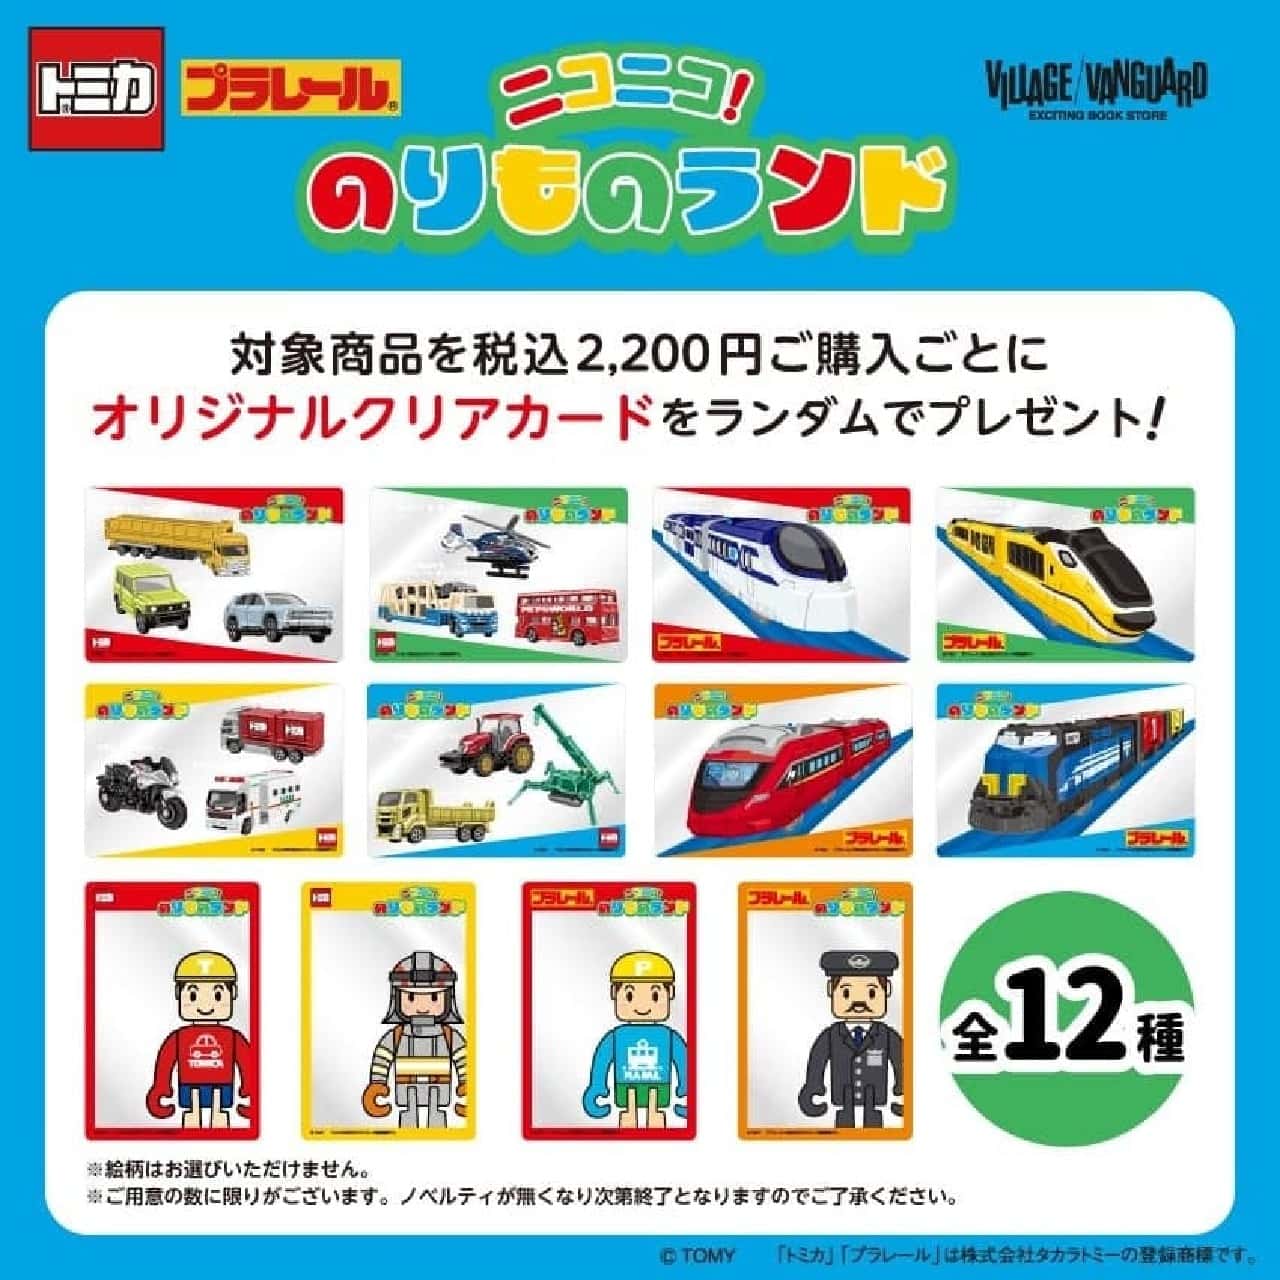 TOMY's Tomica & Plarail Event to be held at AEON MALL Chikushino from June 20 to June 23" Image 2